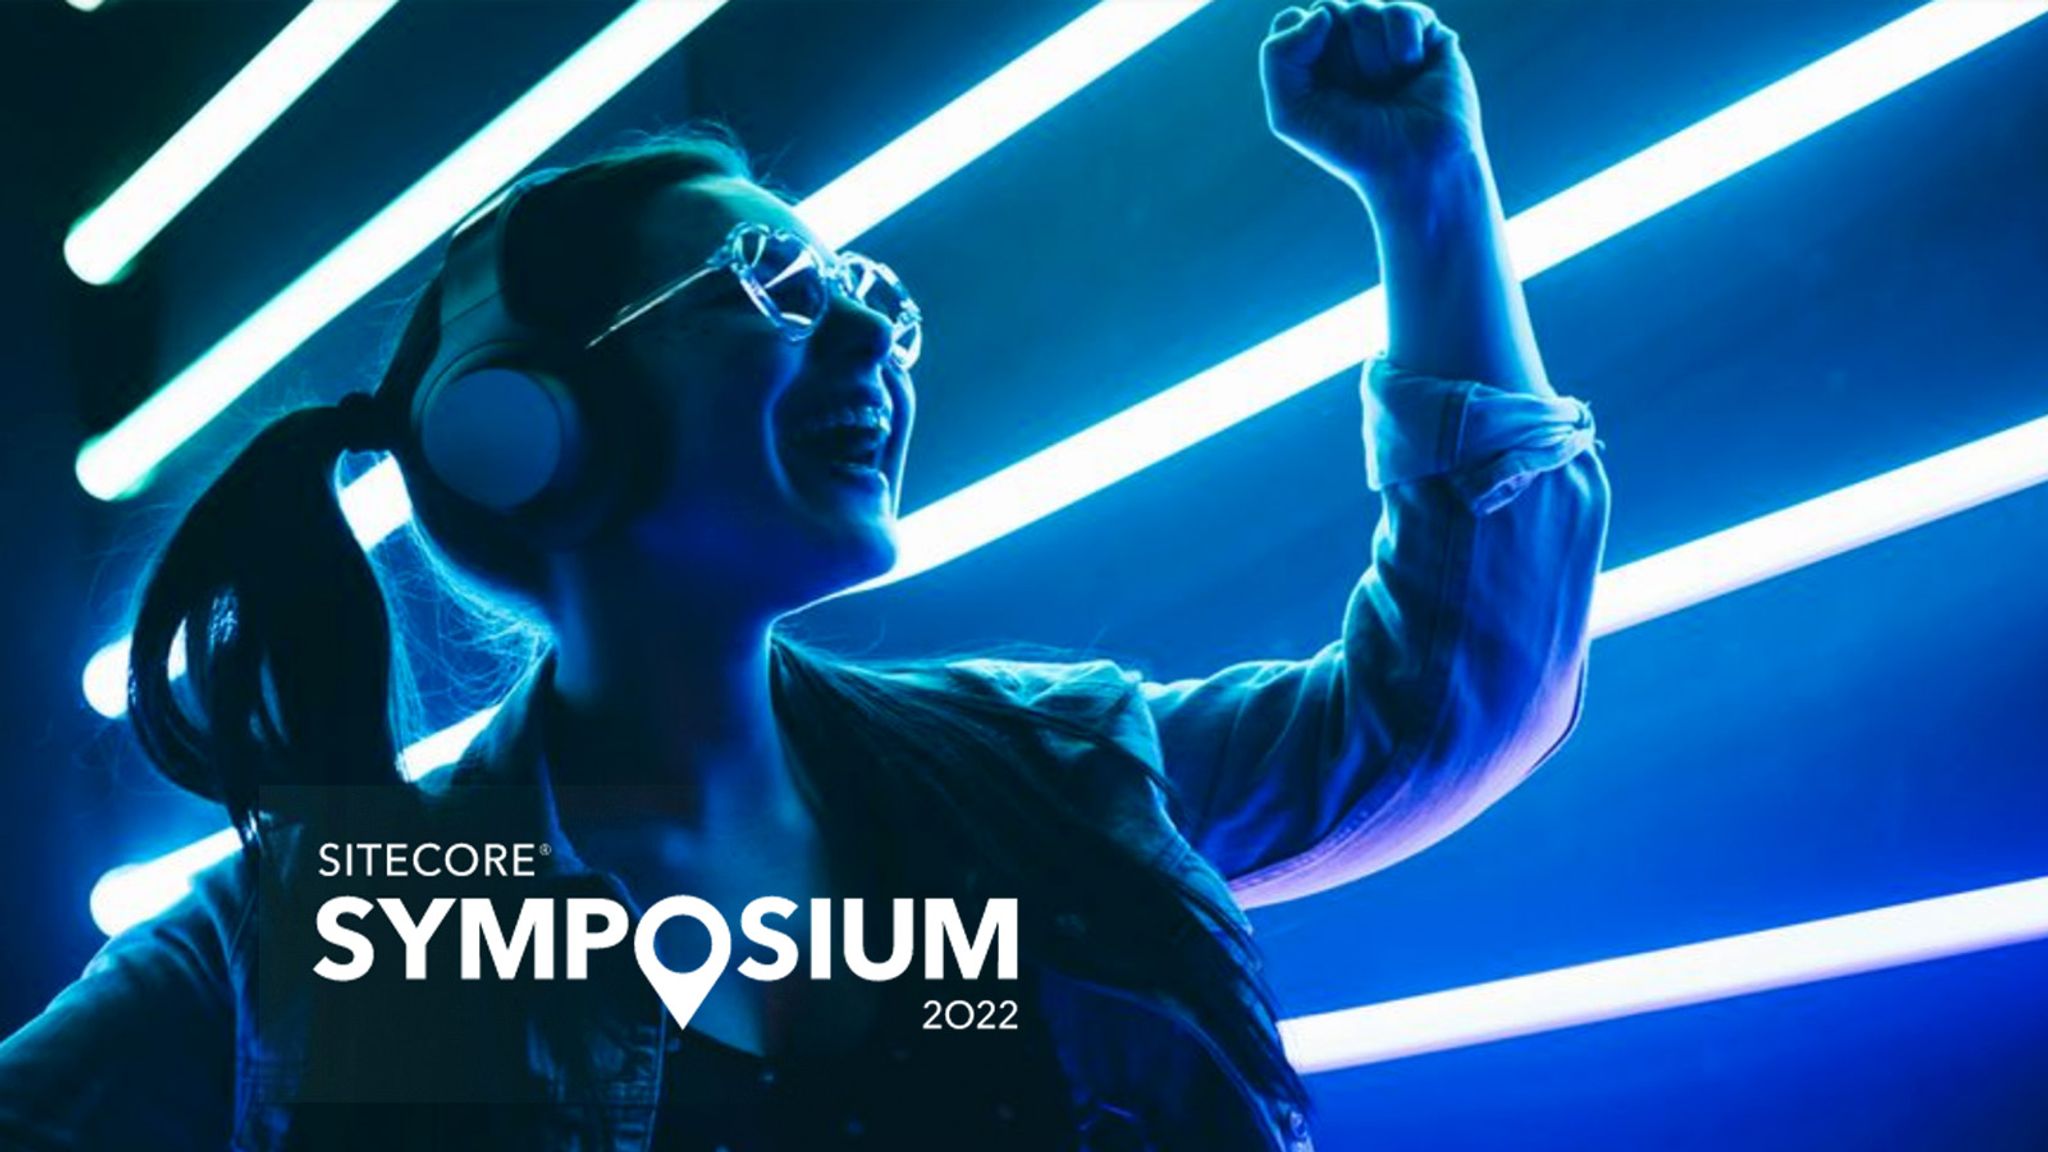 Sitecore Symposium 2022 logo overlaying an image of a young woman holding her arm up in joy against a background of parallel neon lights.